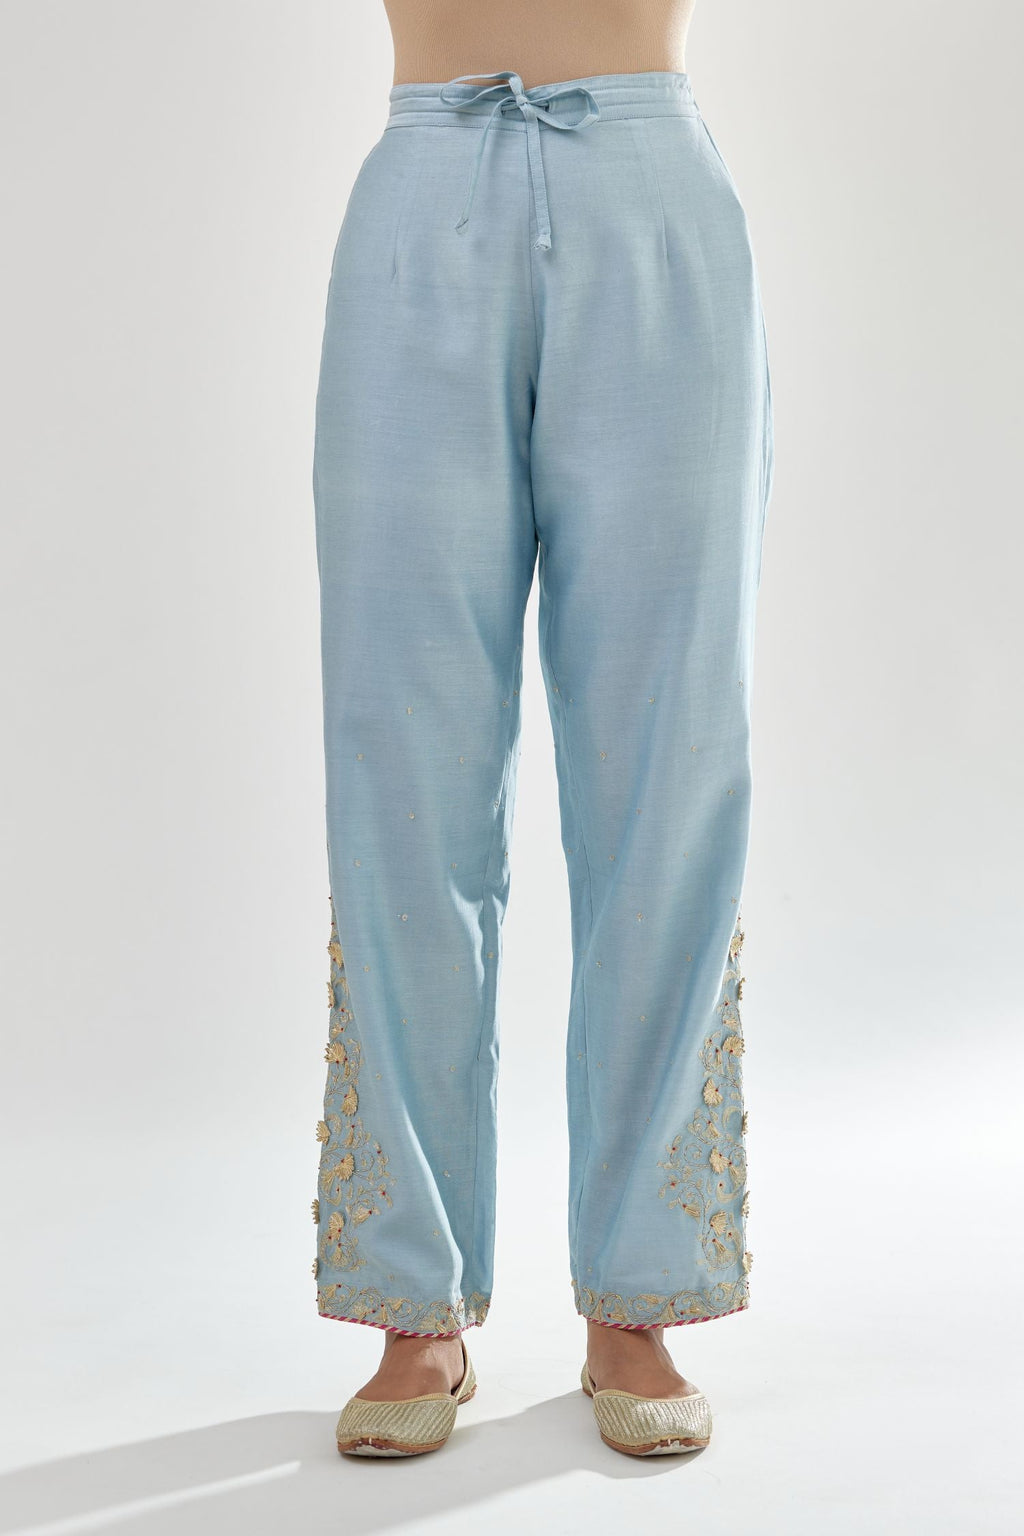 Blue silk chanderi straight pants, hem is detailed with zari, dori and gota embroidered boota at sides.